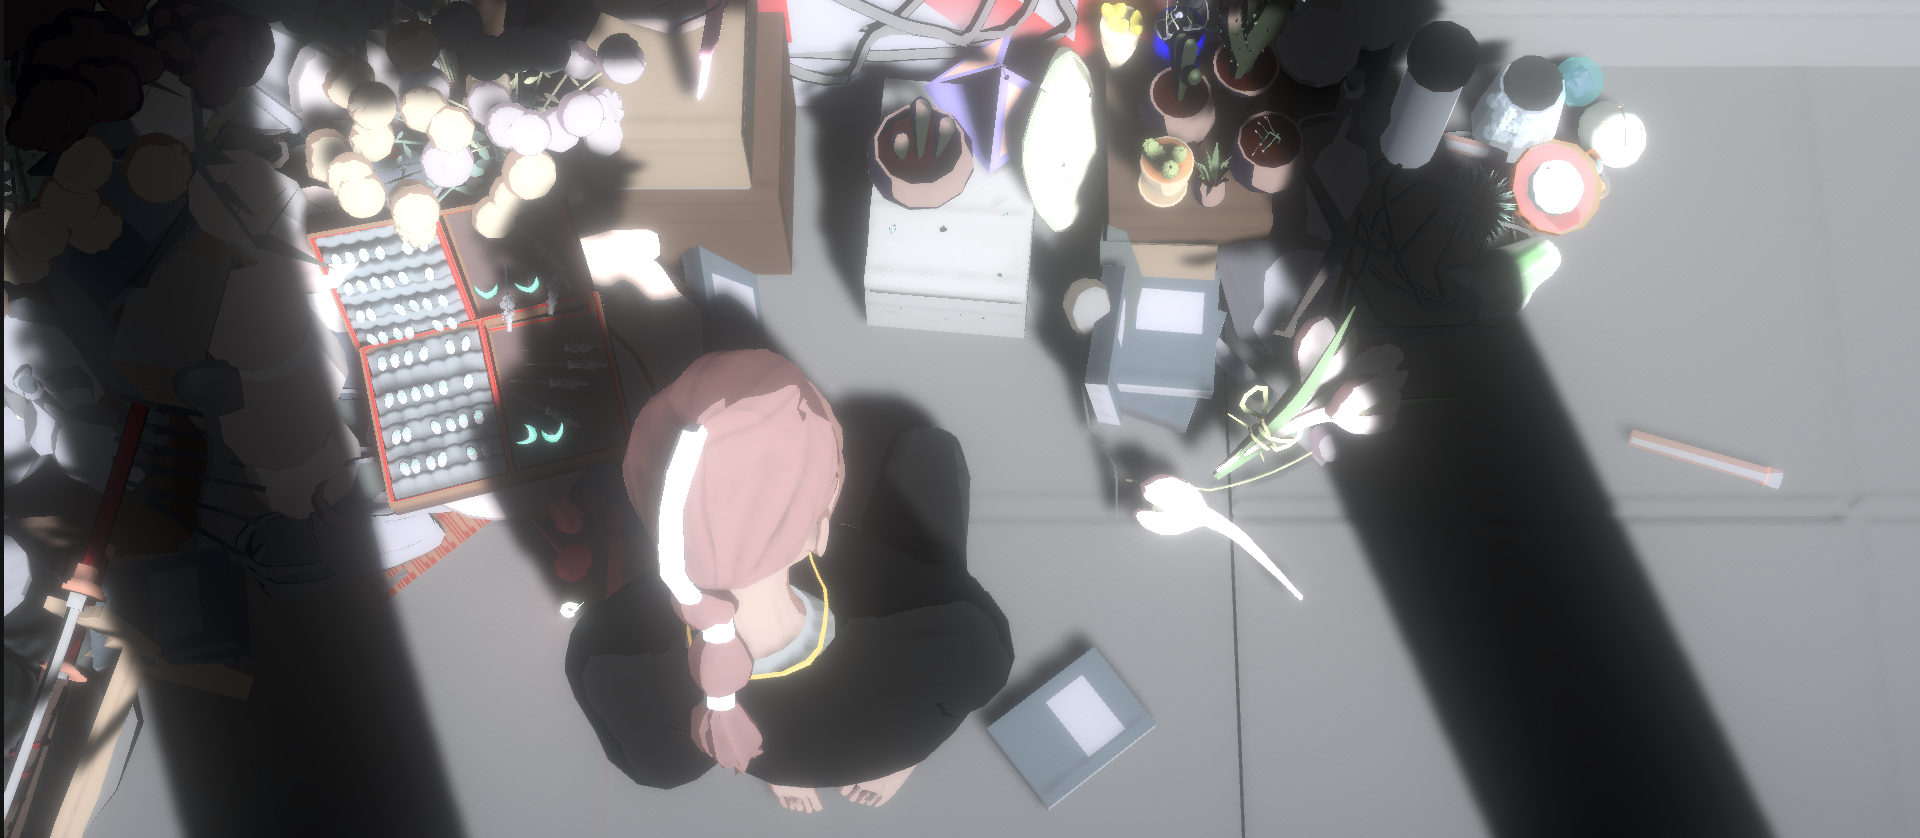 An overhead view of an animated girl kneeling on a floor scattered with items including several books